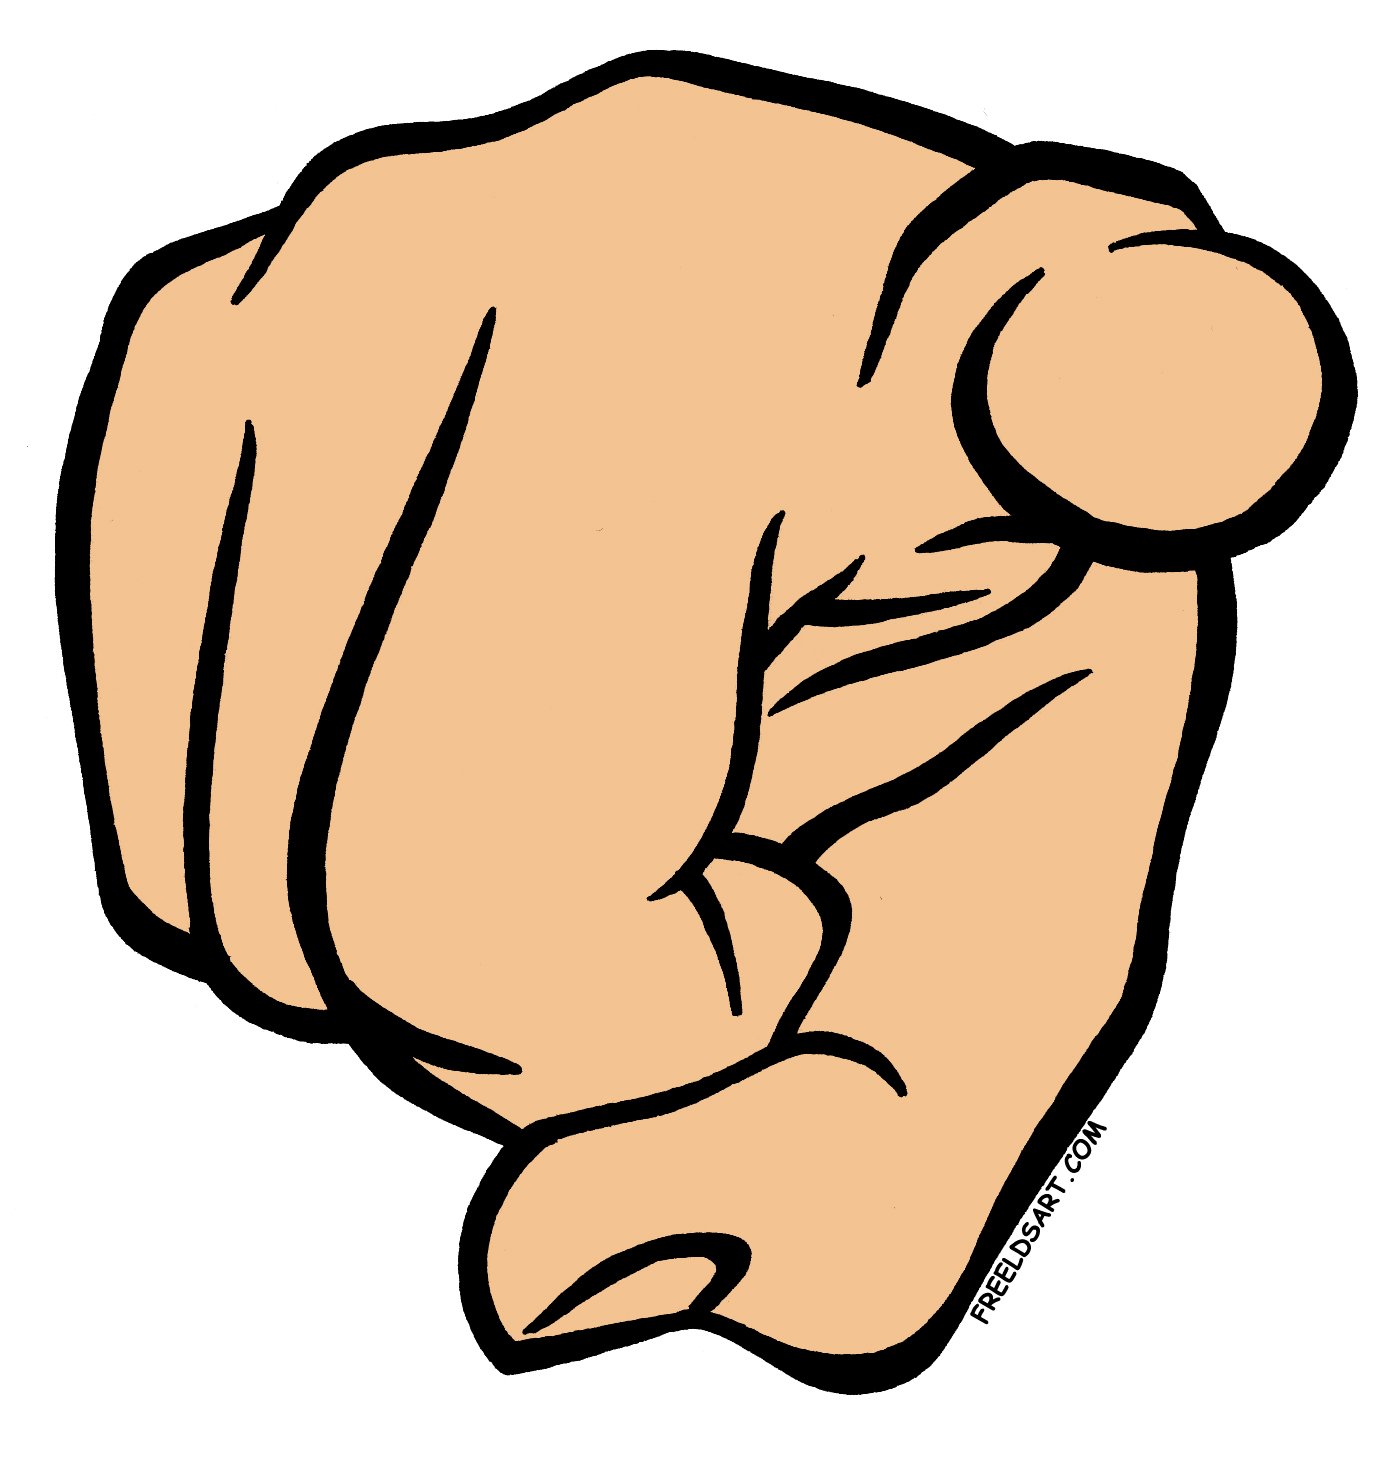 Cartoon Finger Pointing At You - ClipArt Best